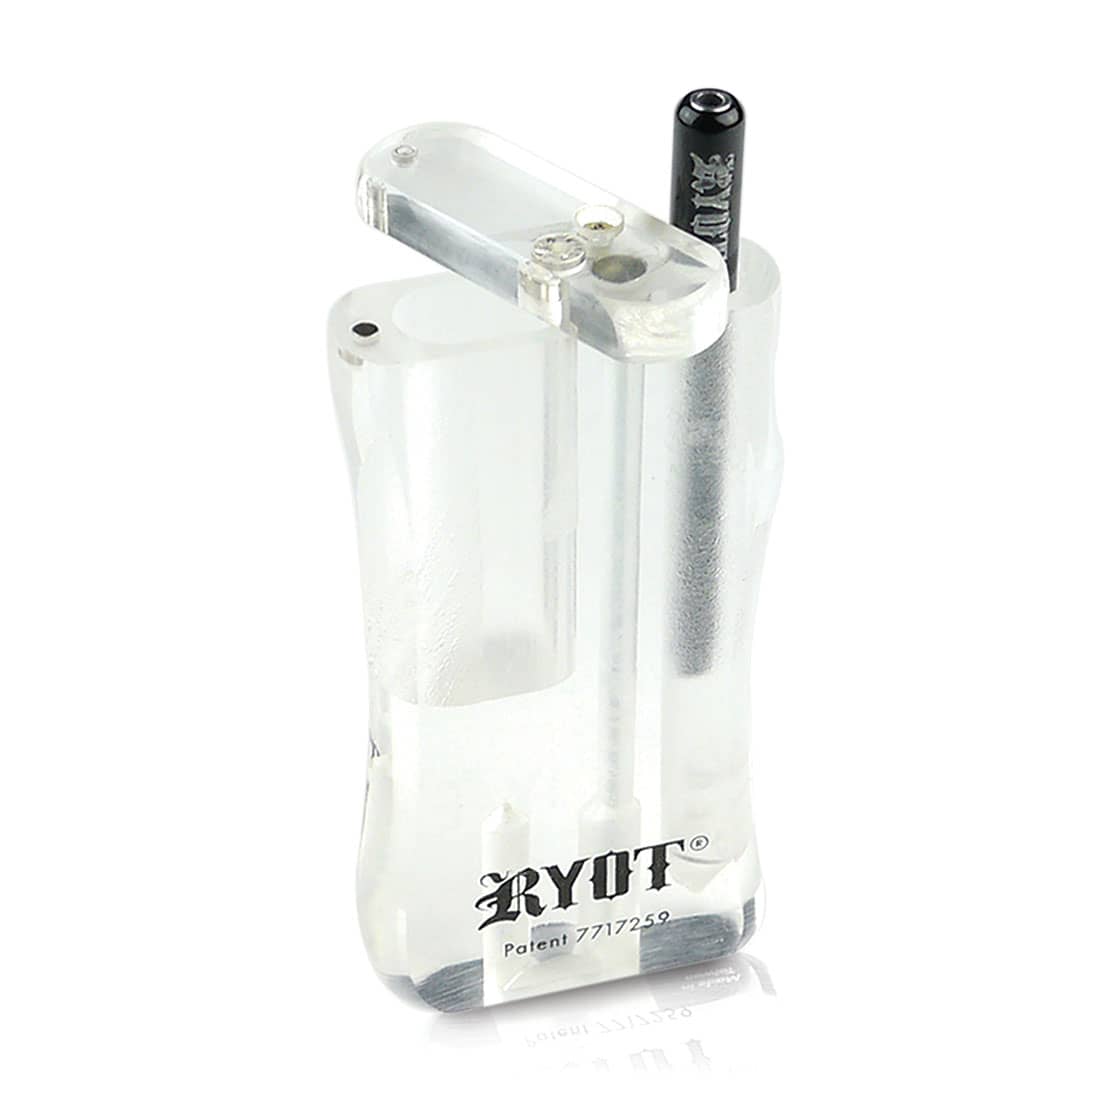 All In One Smoking Dugout Lighter Combo